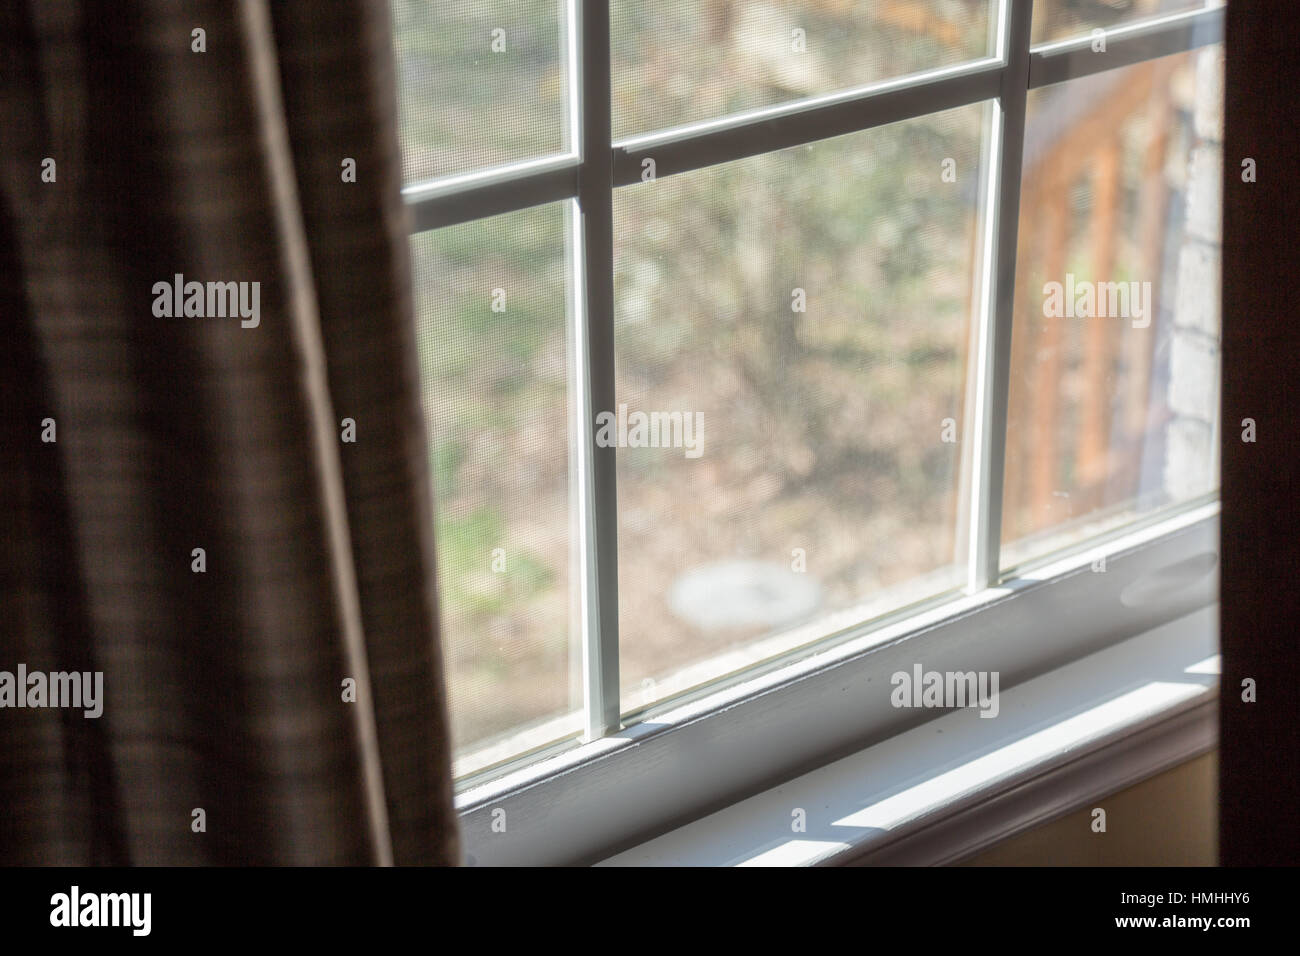 A naturally lit window sill and hanging curtains. Stock Photo